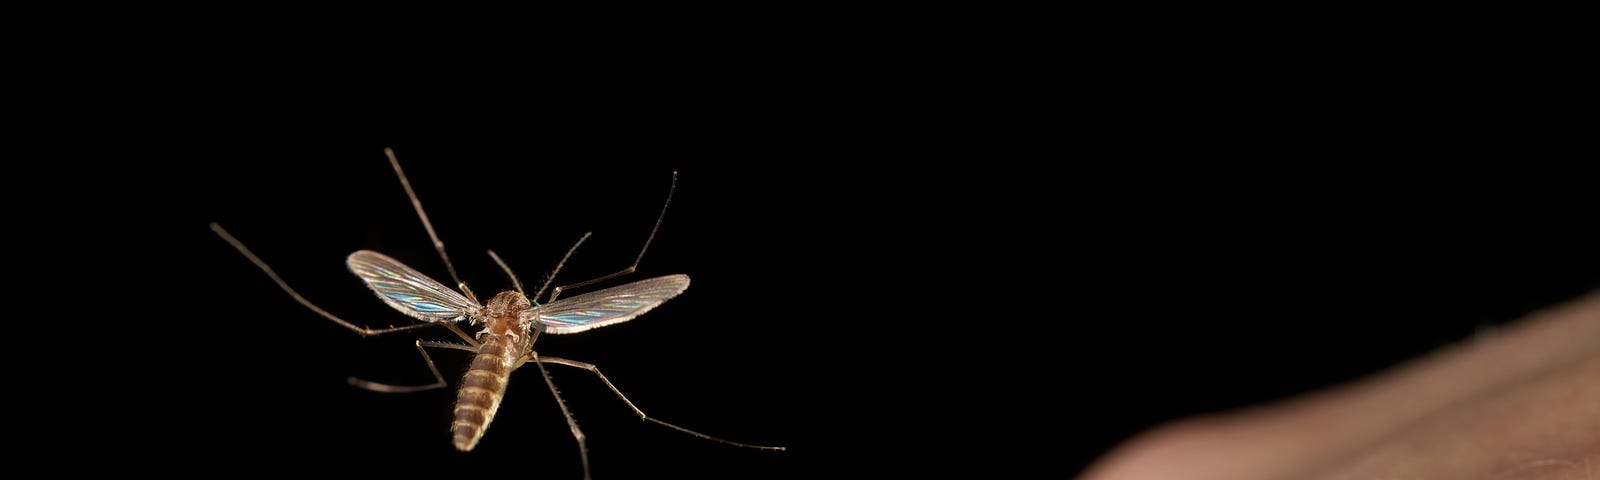 A mosquito about to fly onto a person’s hand.